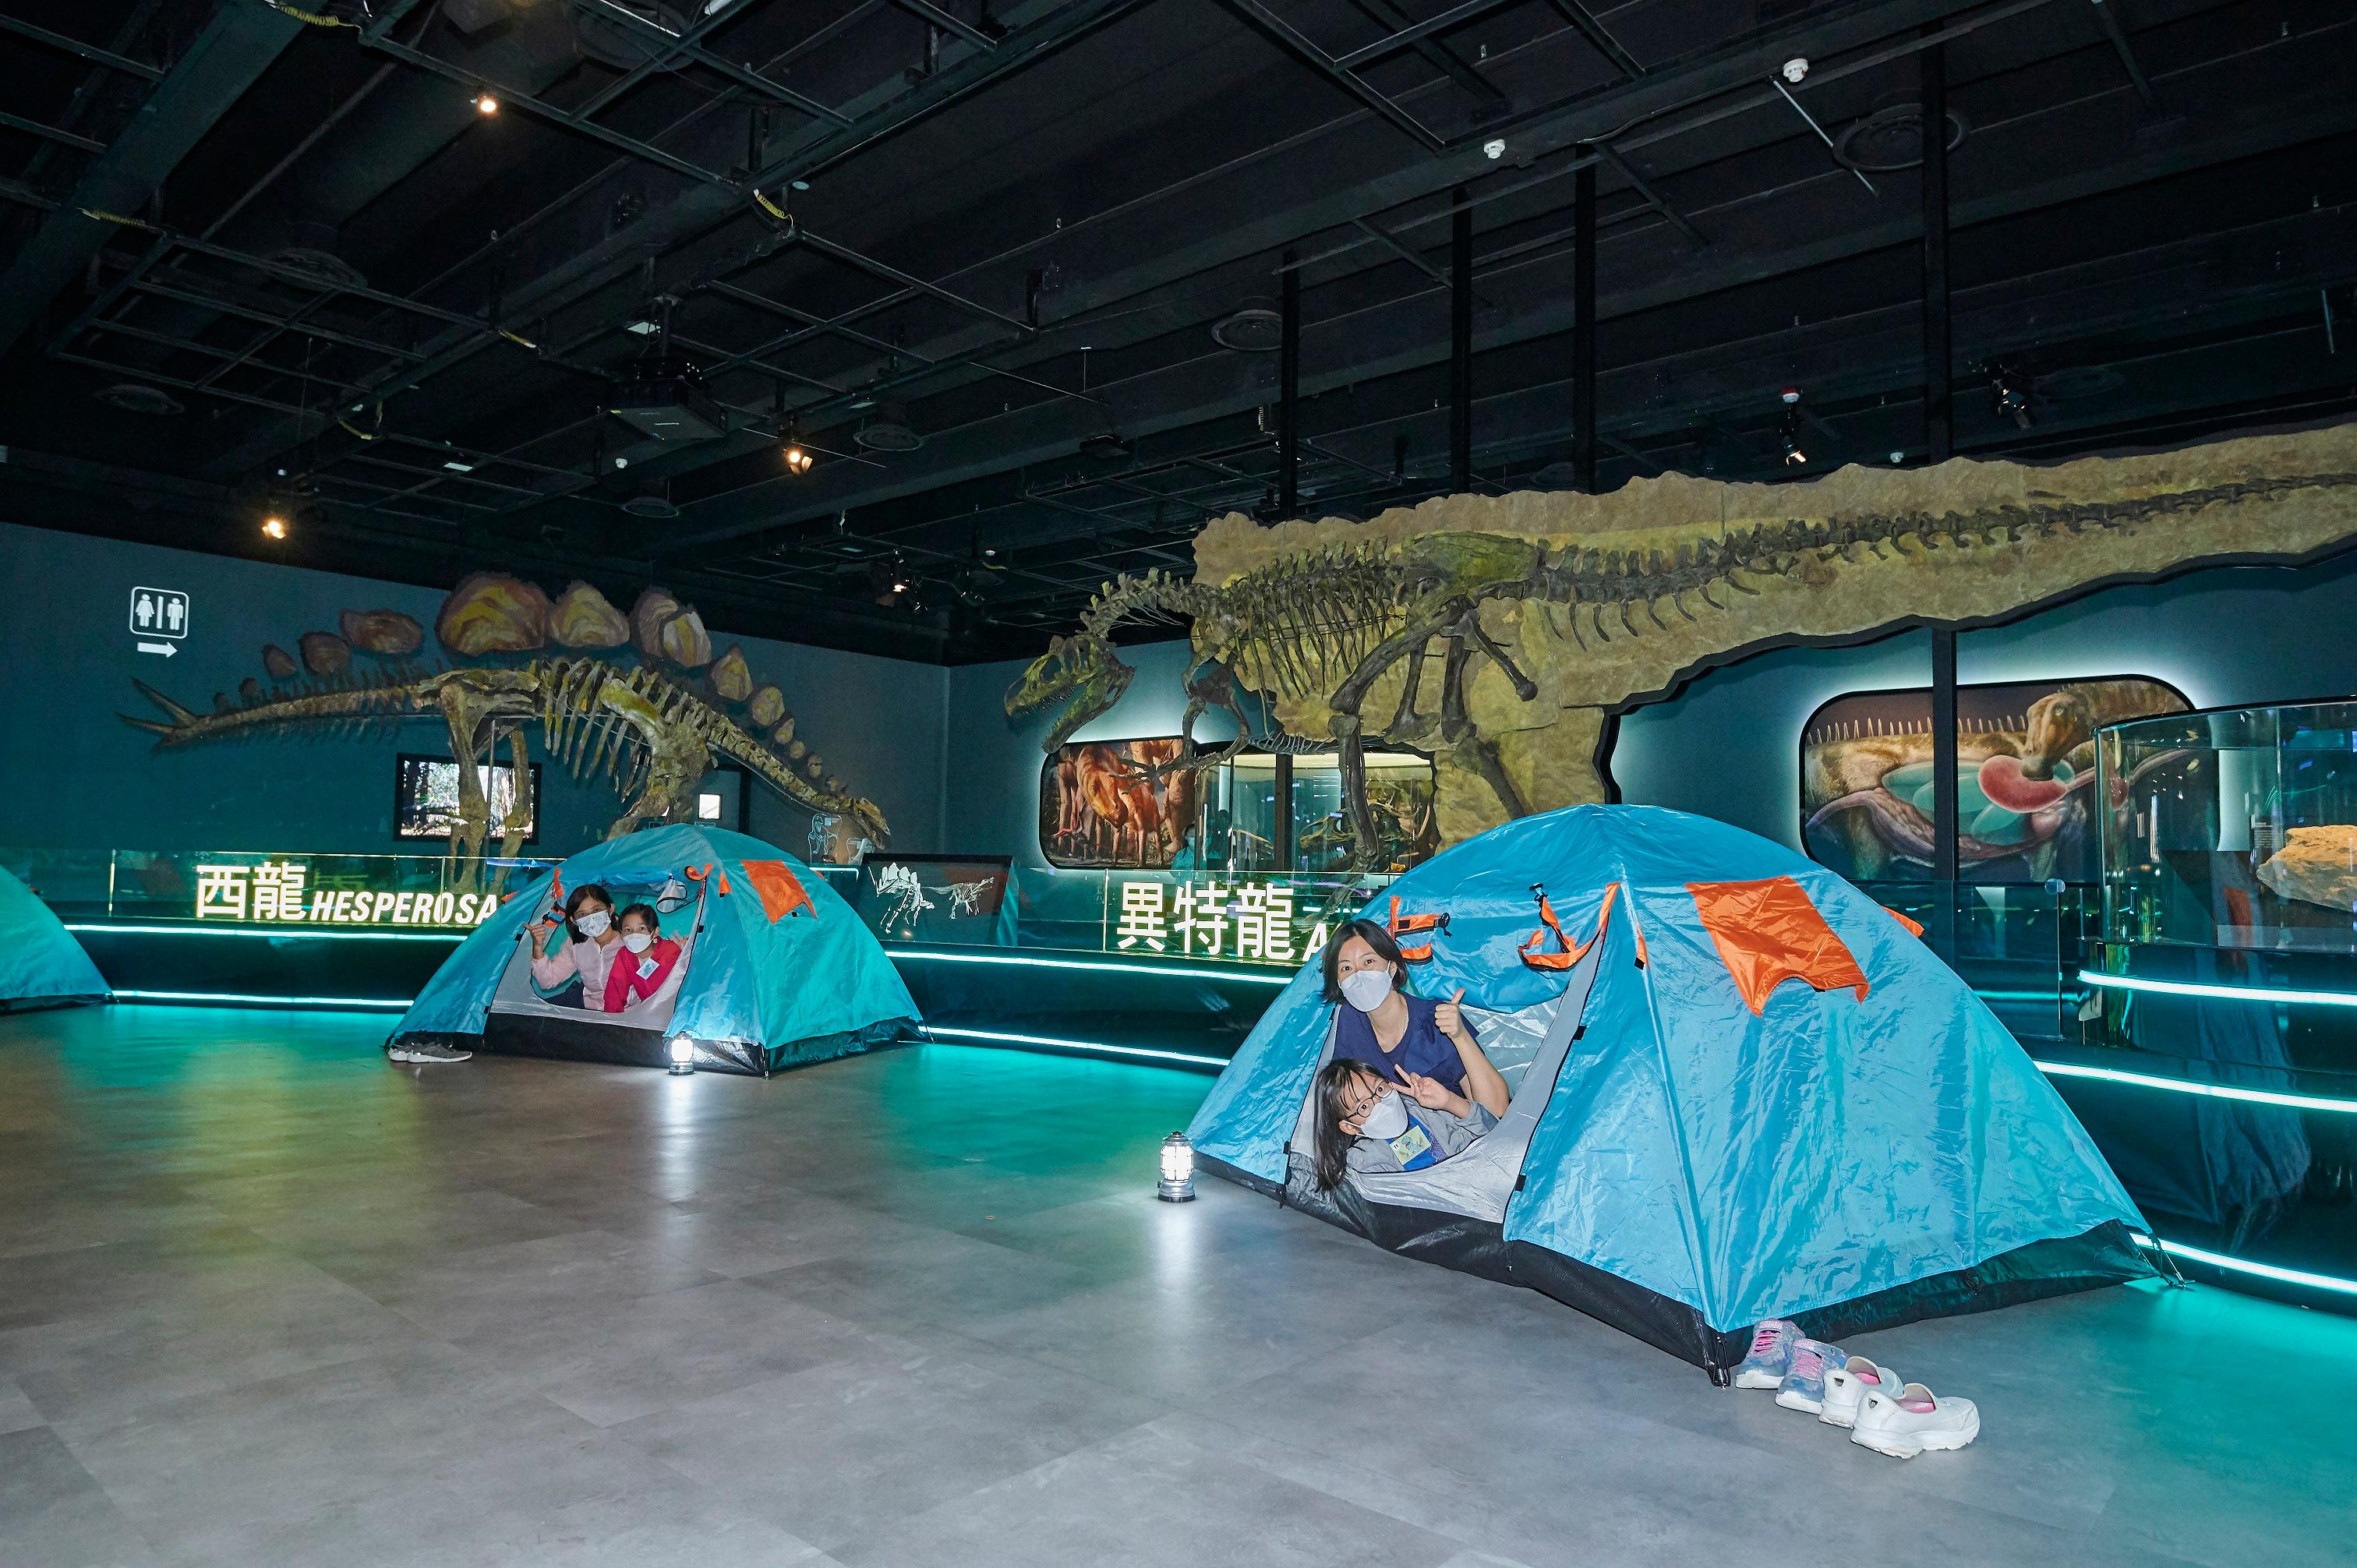 The Hong Kong Science Museum held the first session of "A Night with Dinosaurs" sleepover programme last night (August 5). Participants got ready to sleep in the tents set beneath dinosaur fossils at the gallery.